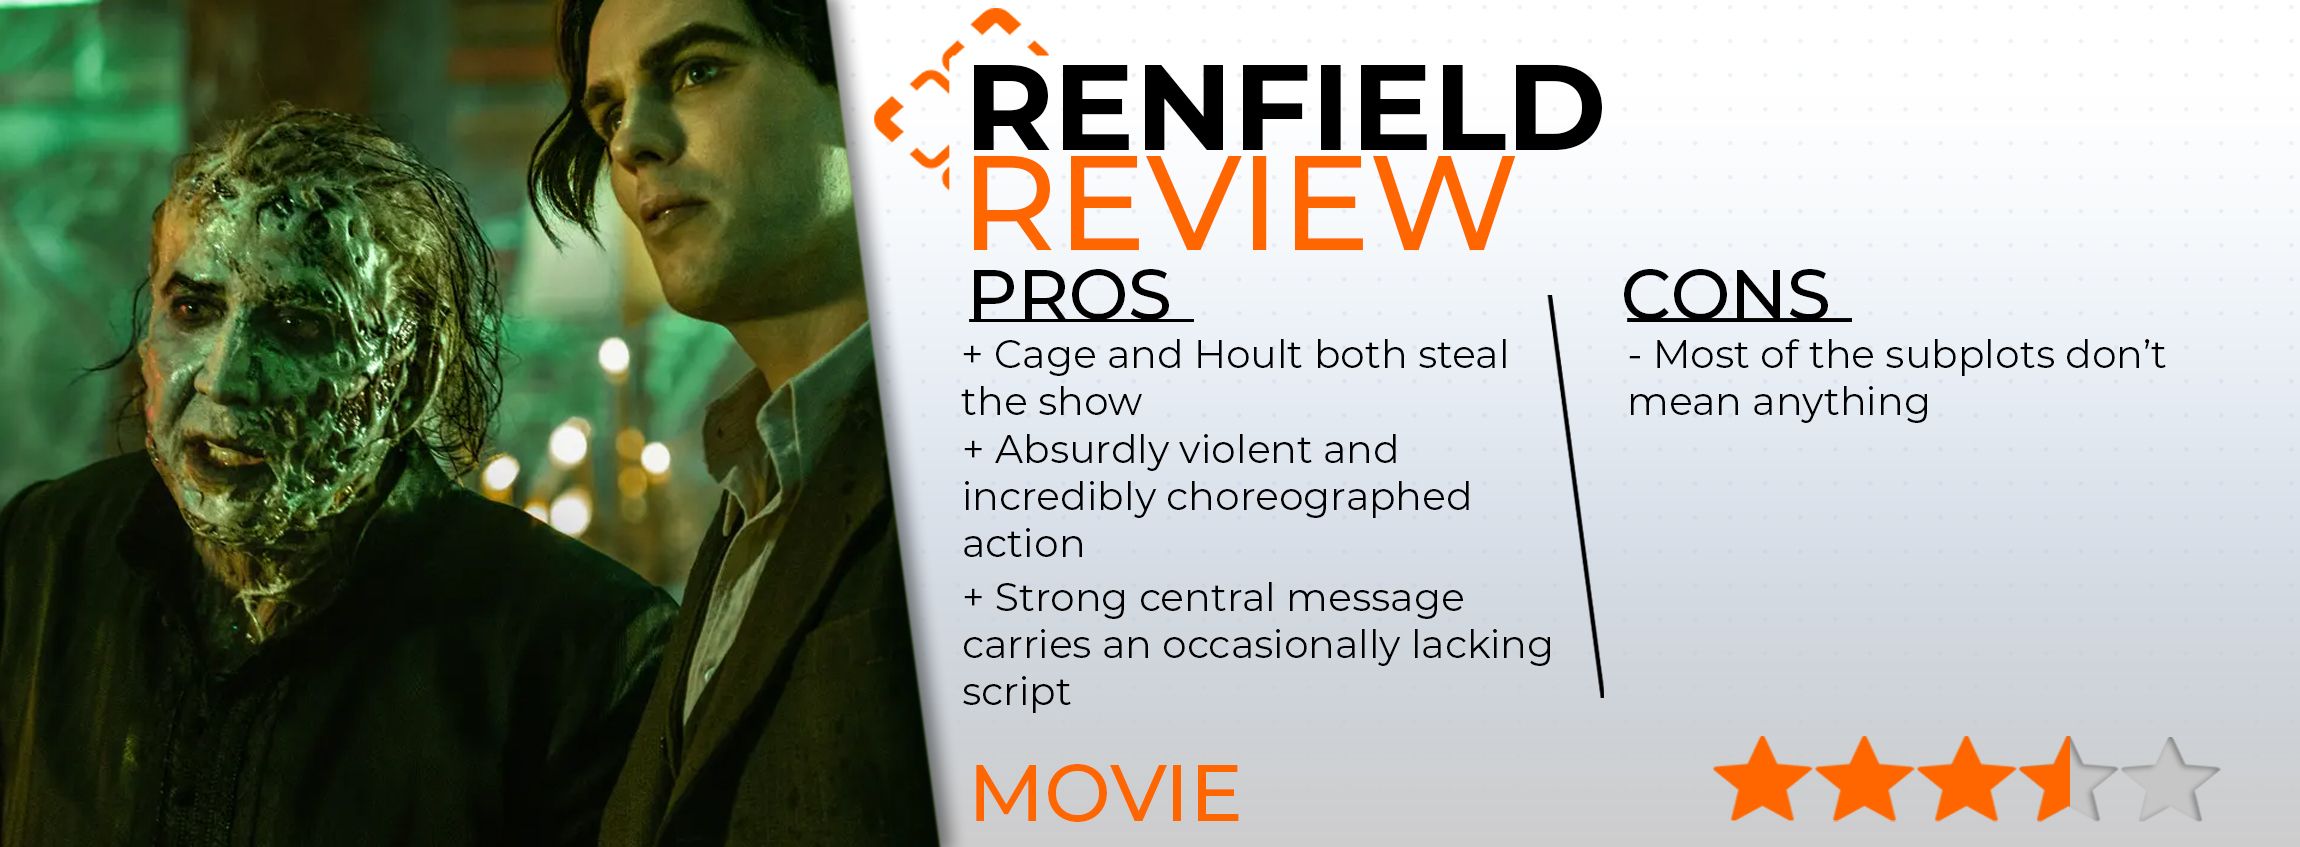 renfield review card